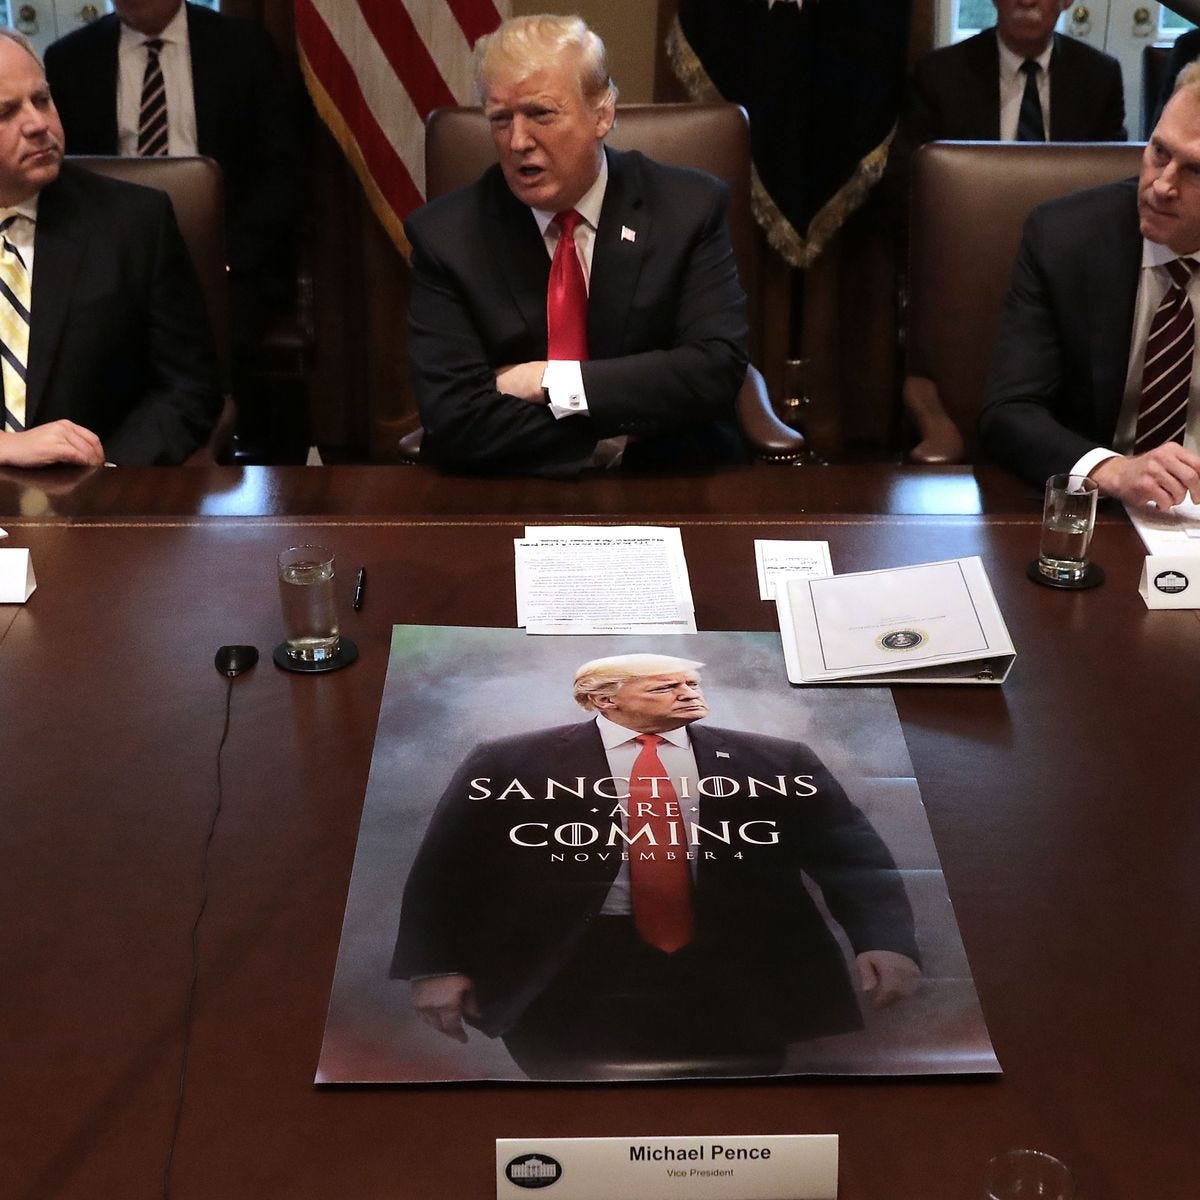 Why Donald Trump's 'Game of Thrones' Poster Makes No Sense